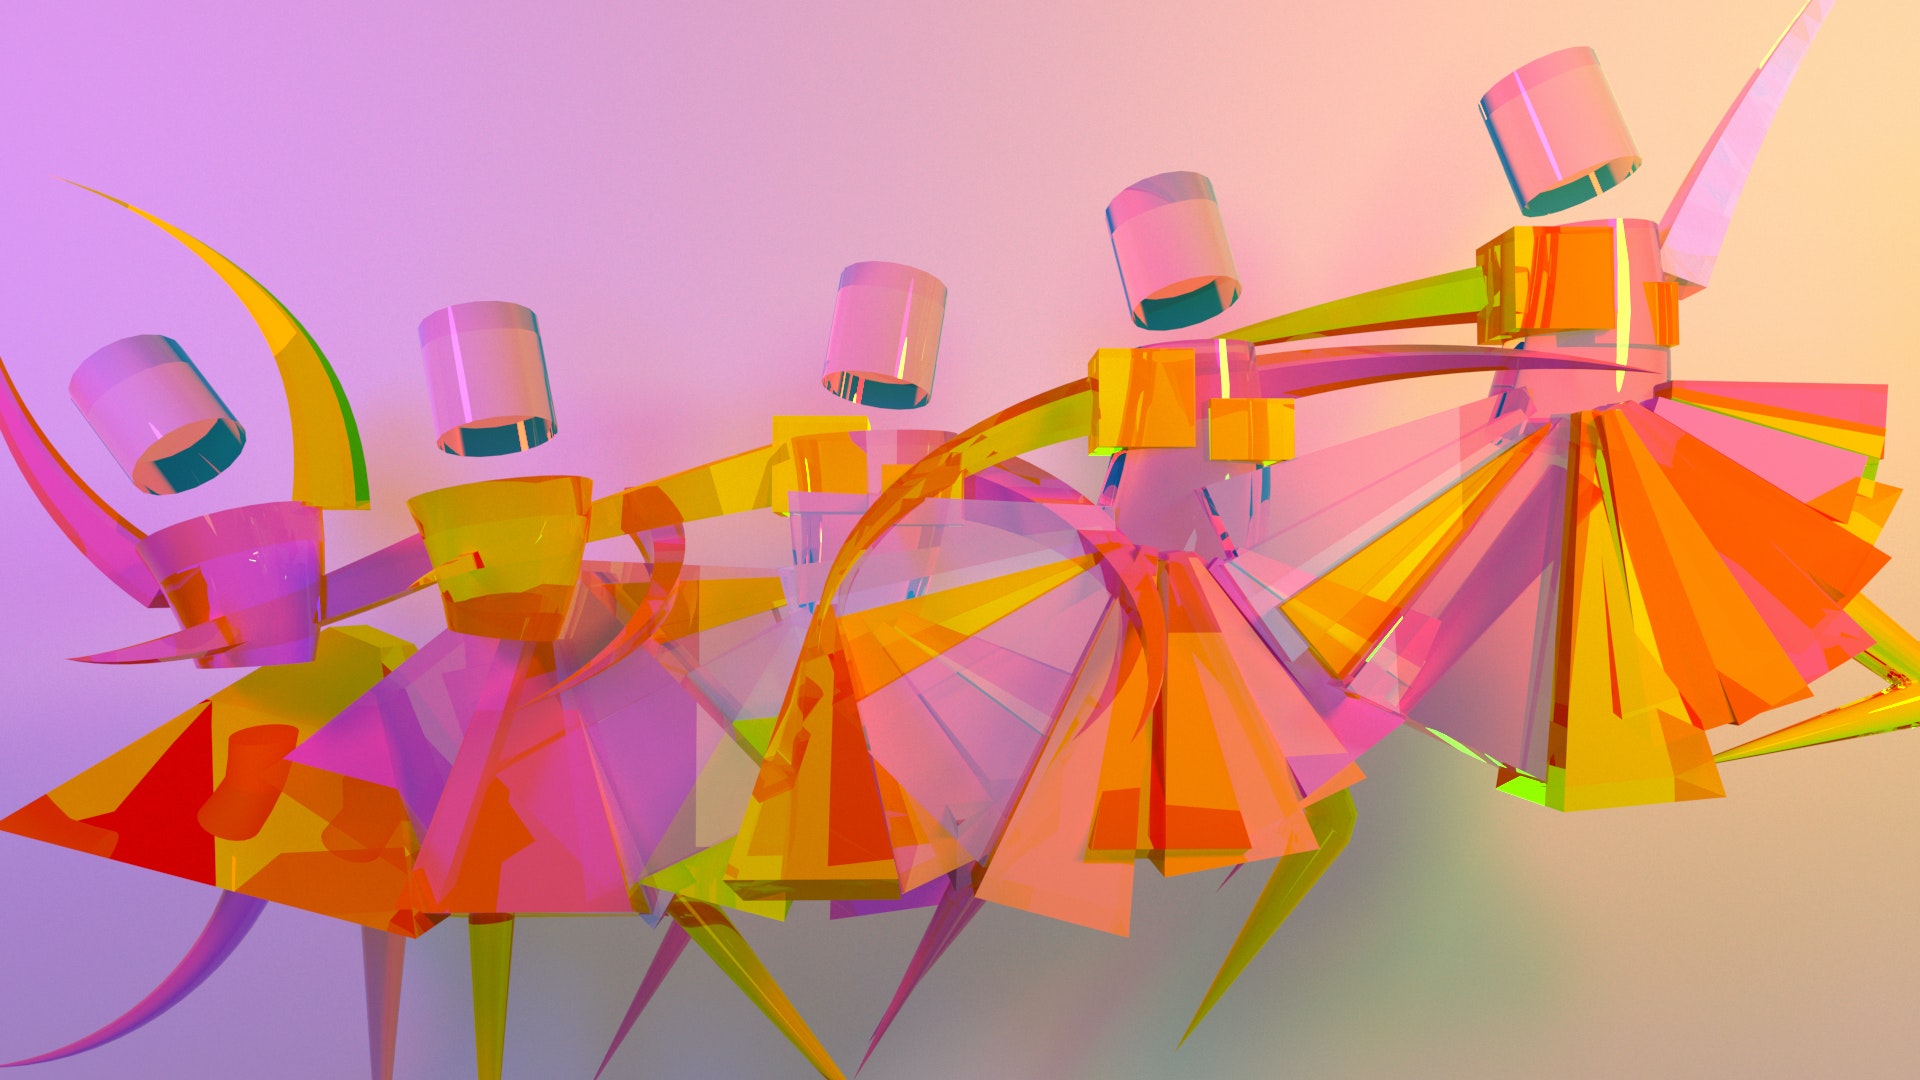 Colorful image of animated geometric dancers leaping across the screen